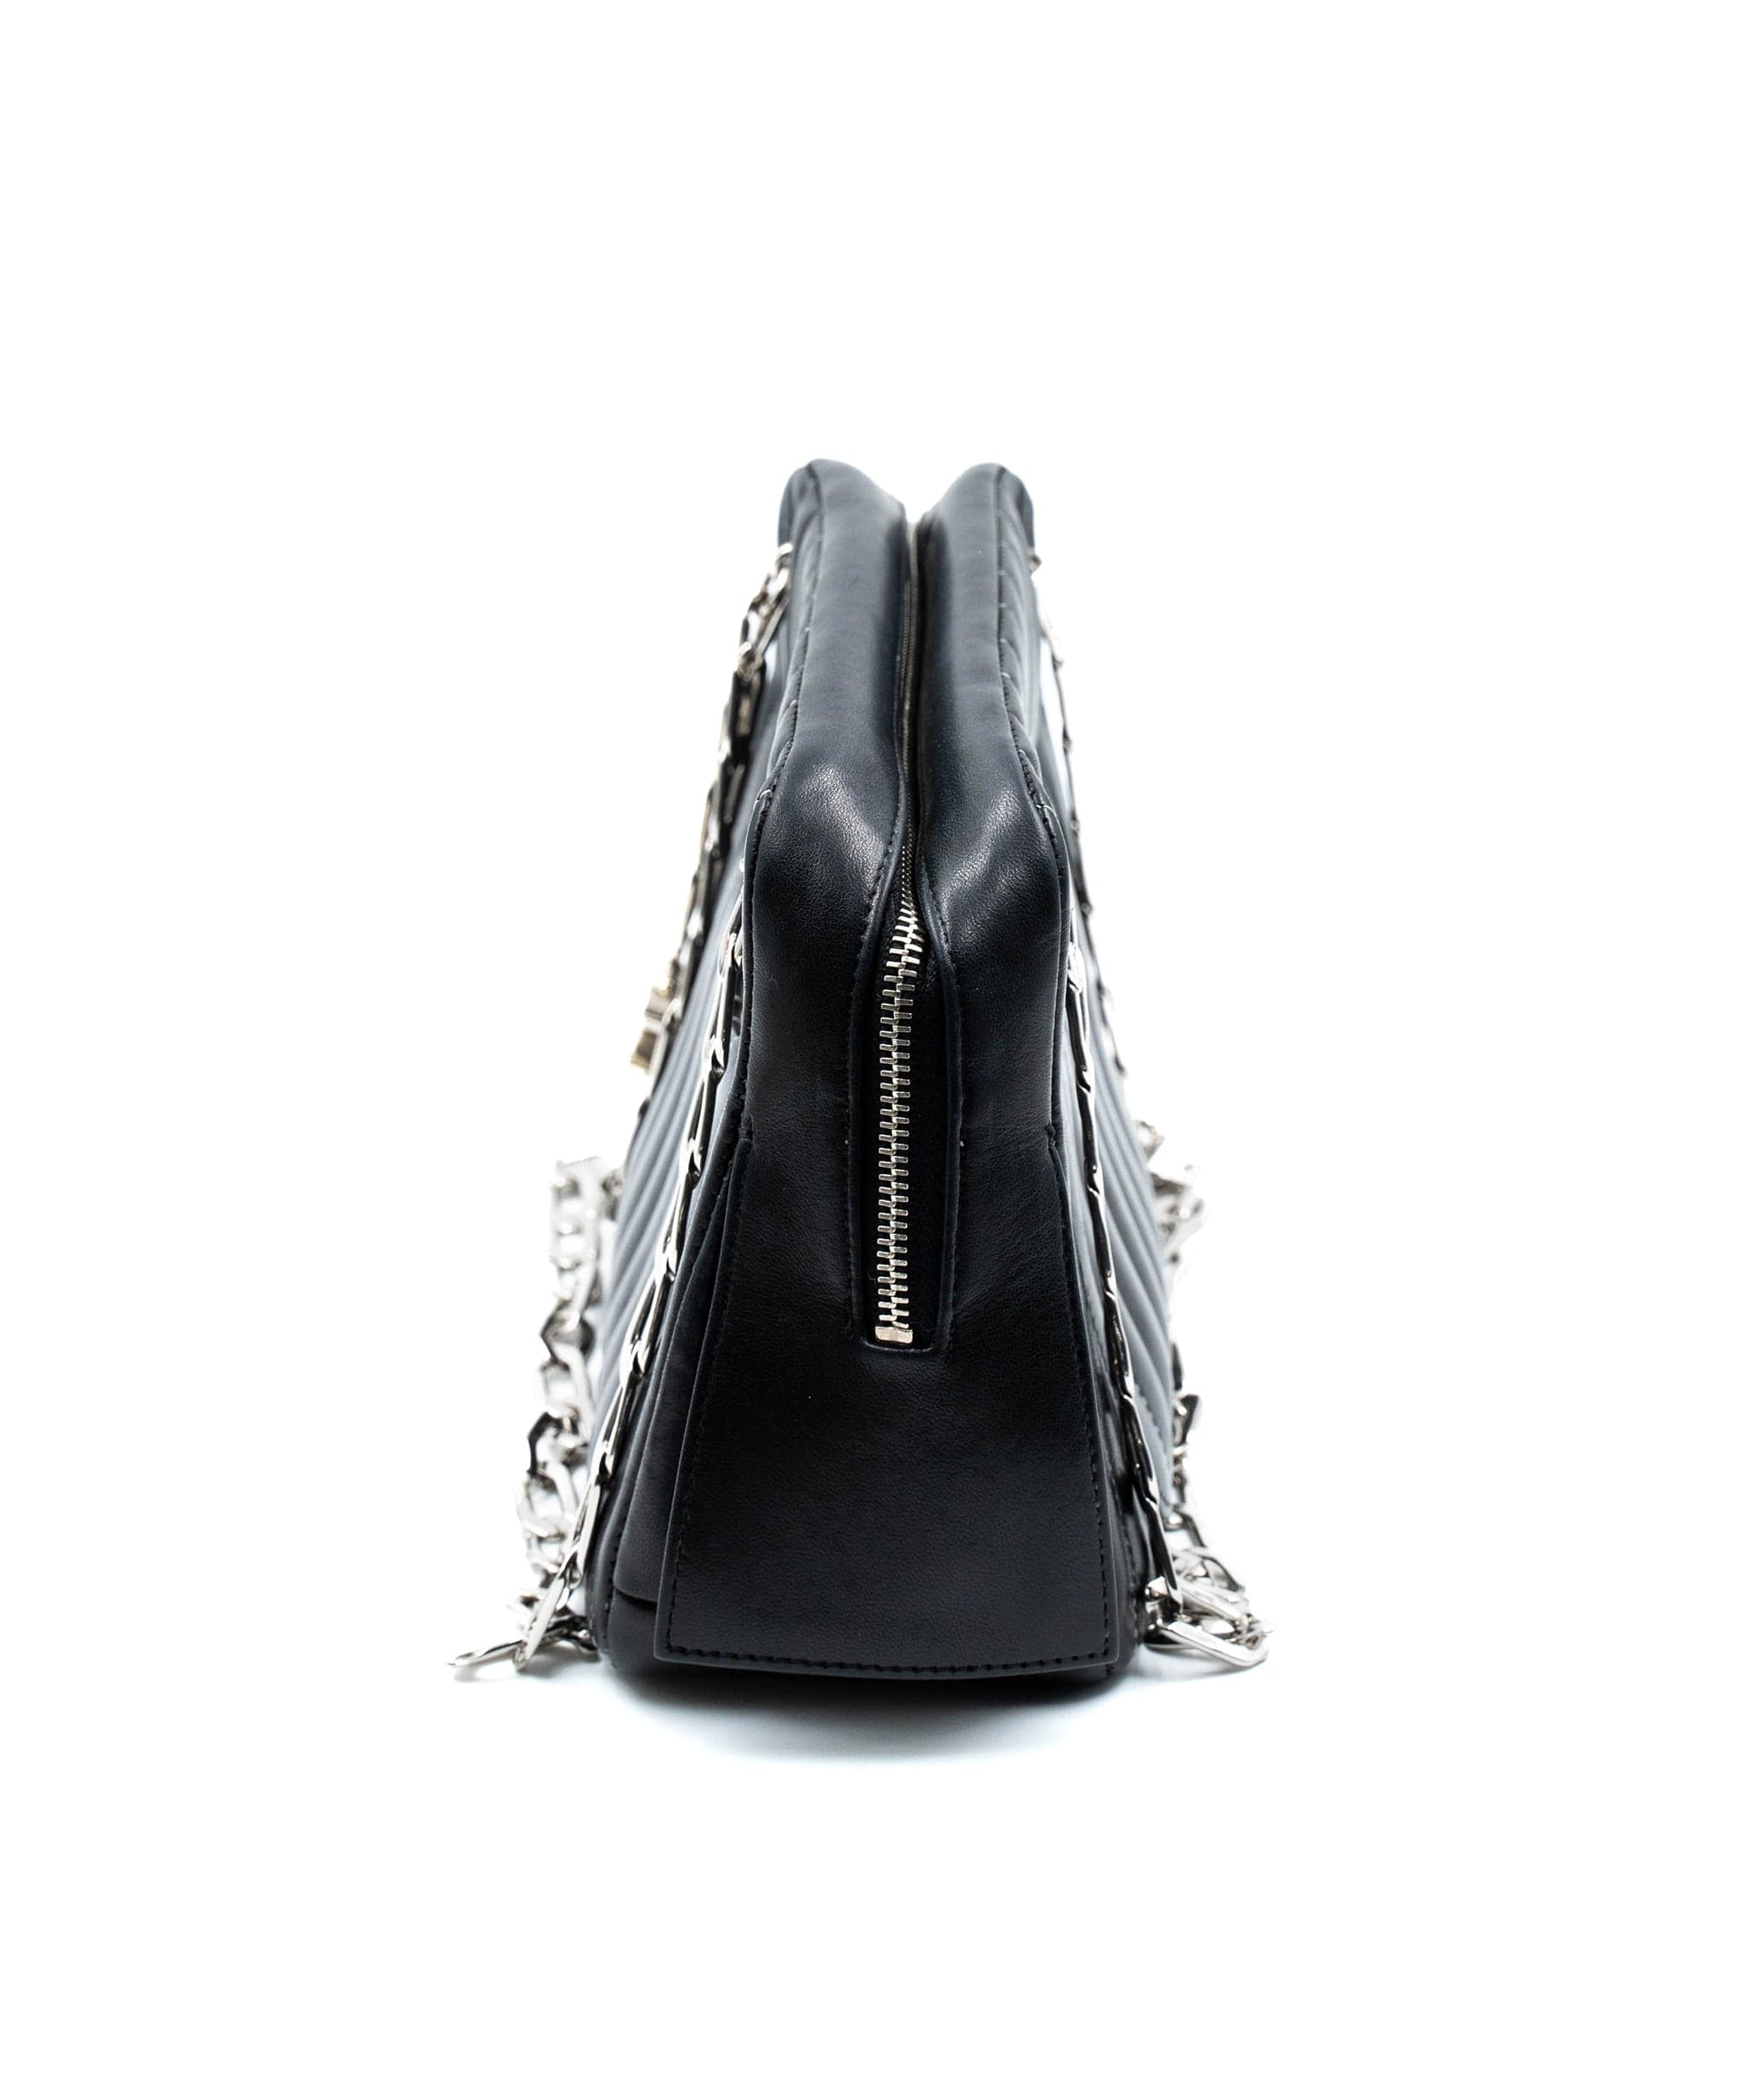 Chanel Chanel Mademoiselle Black bag with silver hardware - AWC1180